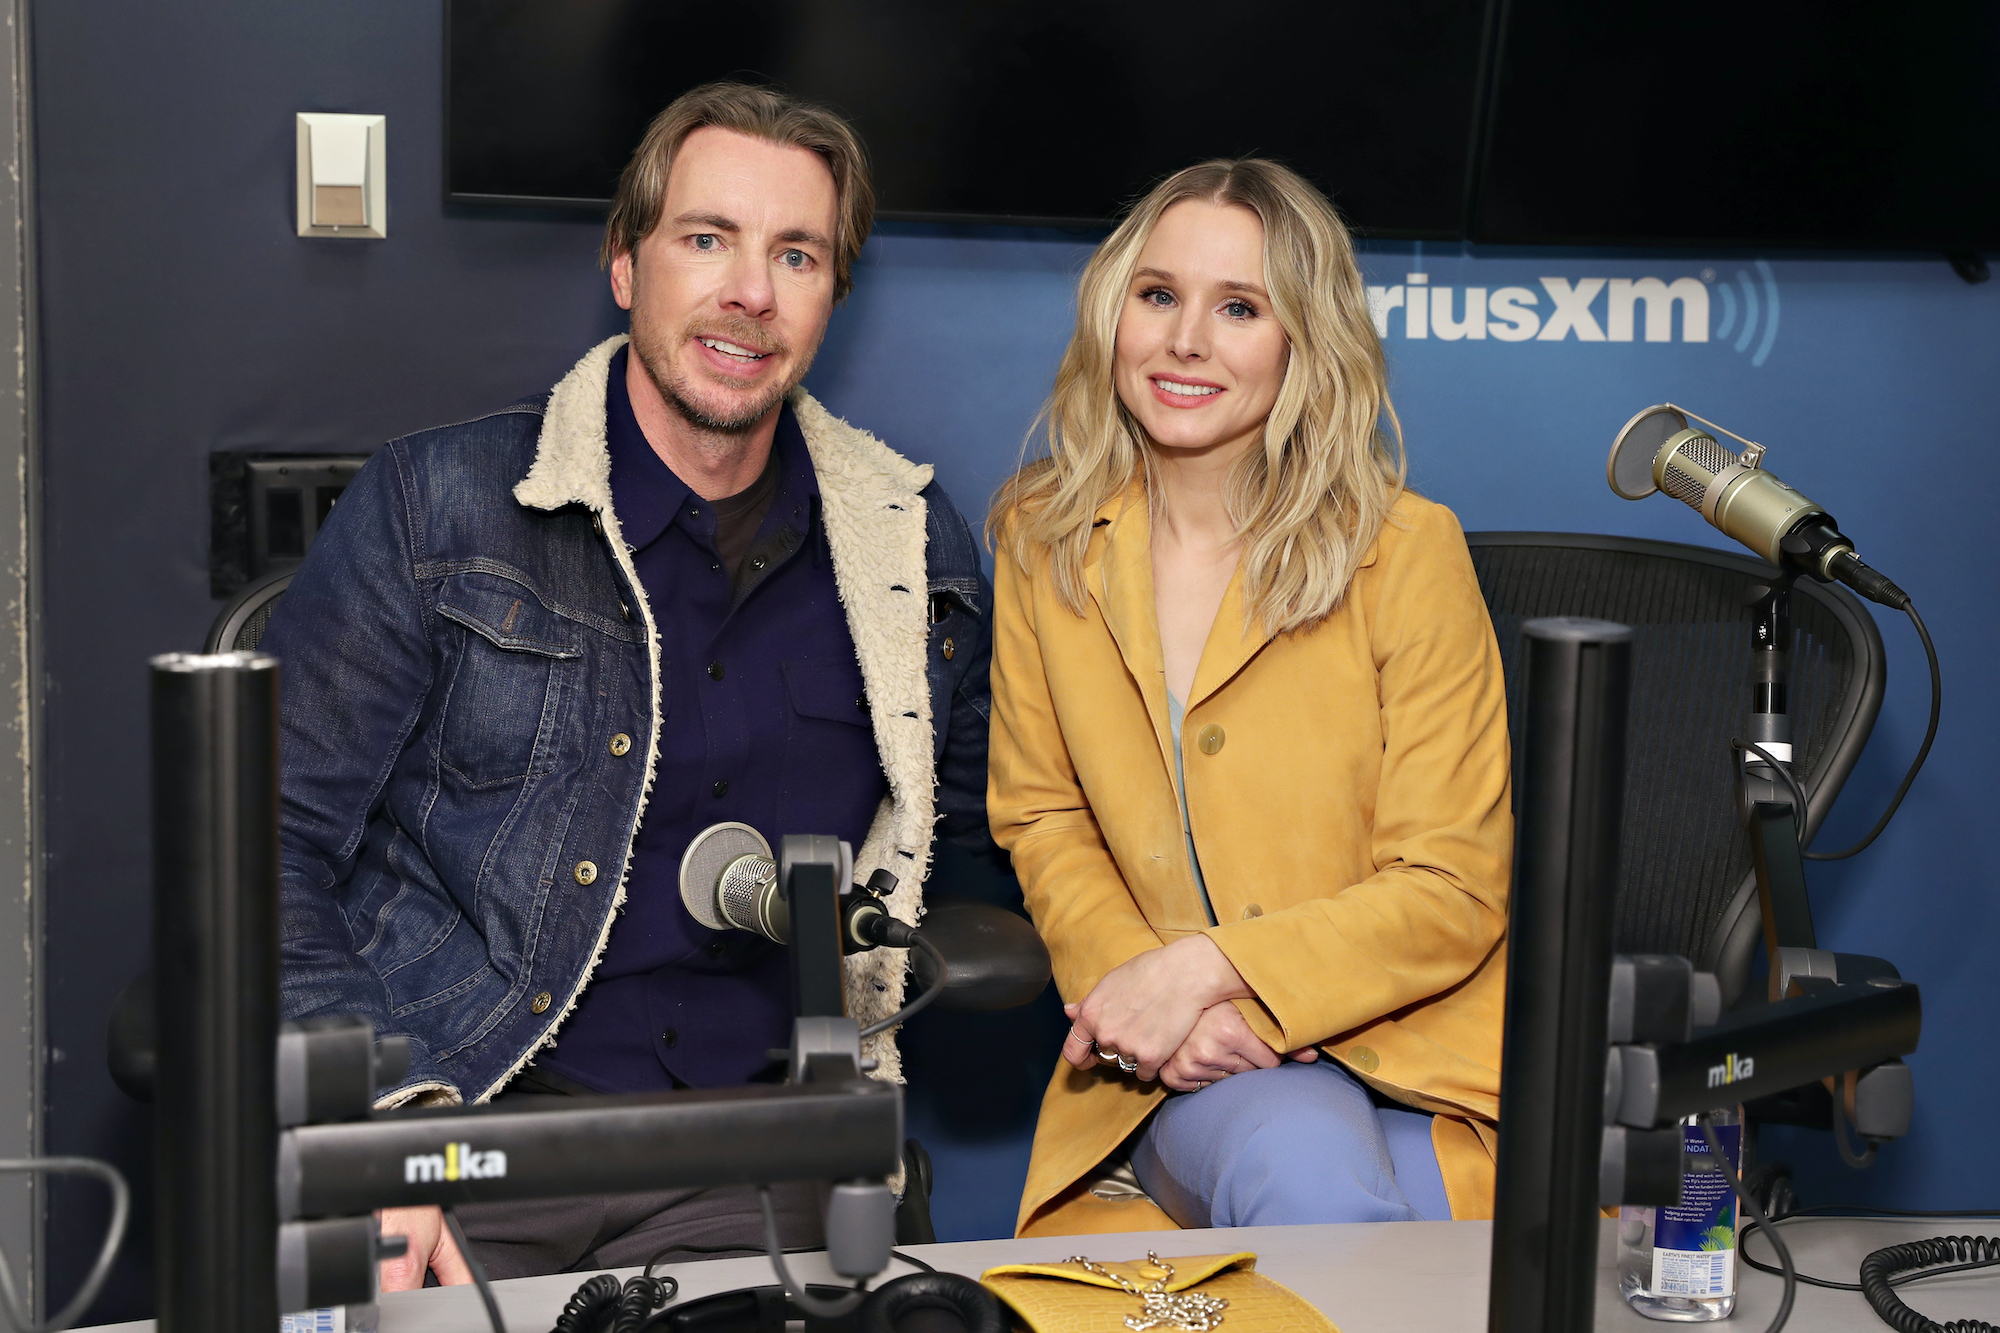 Dax Shepard And Kristen Bell Treat Their Relationship Like A Job Here S Why